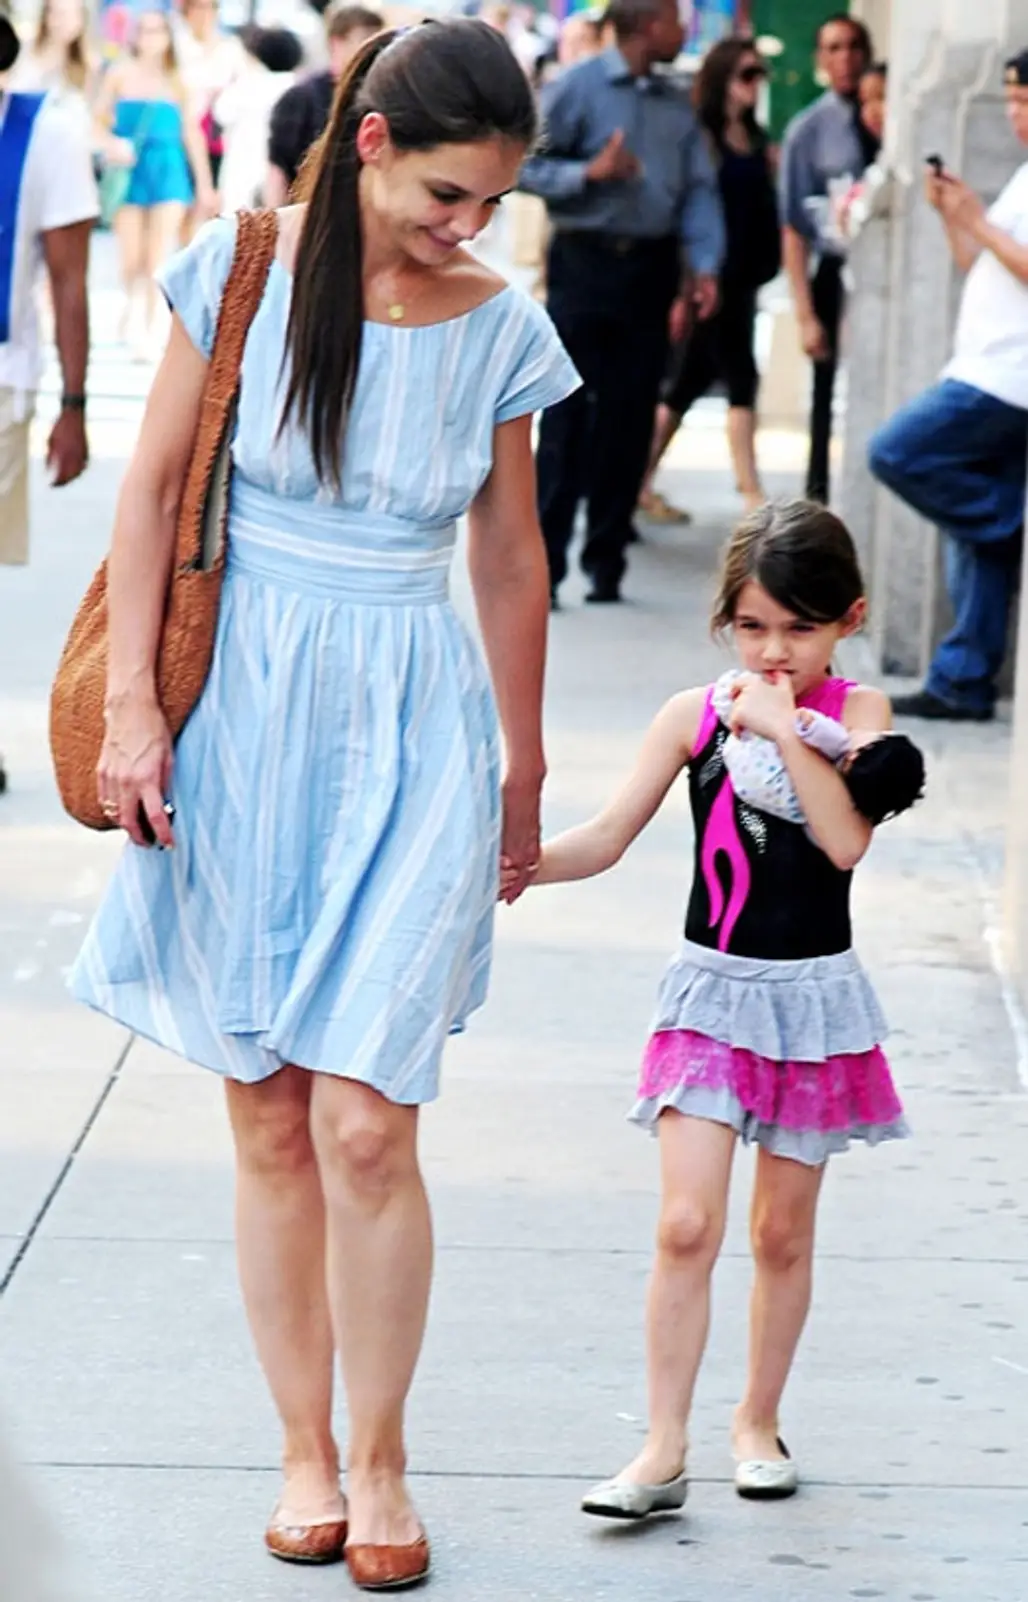 Suri Cruise, Daughter of Katie Holmes and Tom Cruise